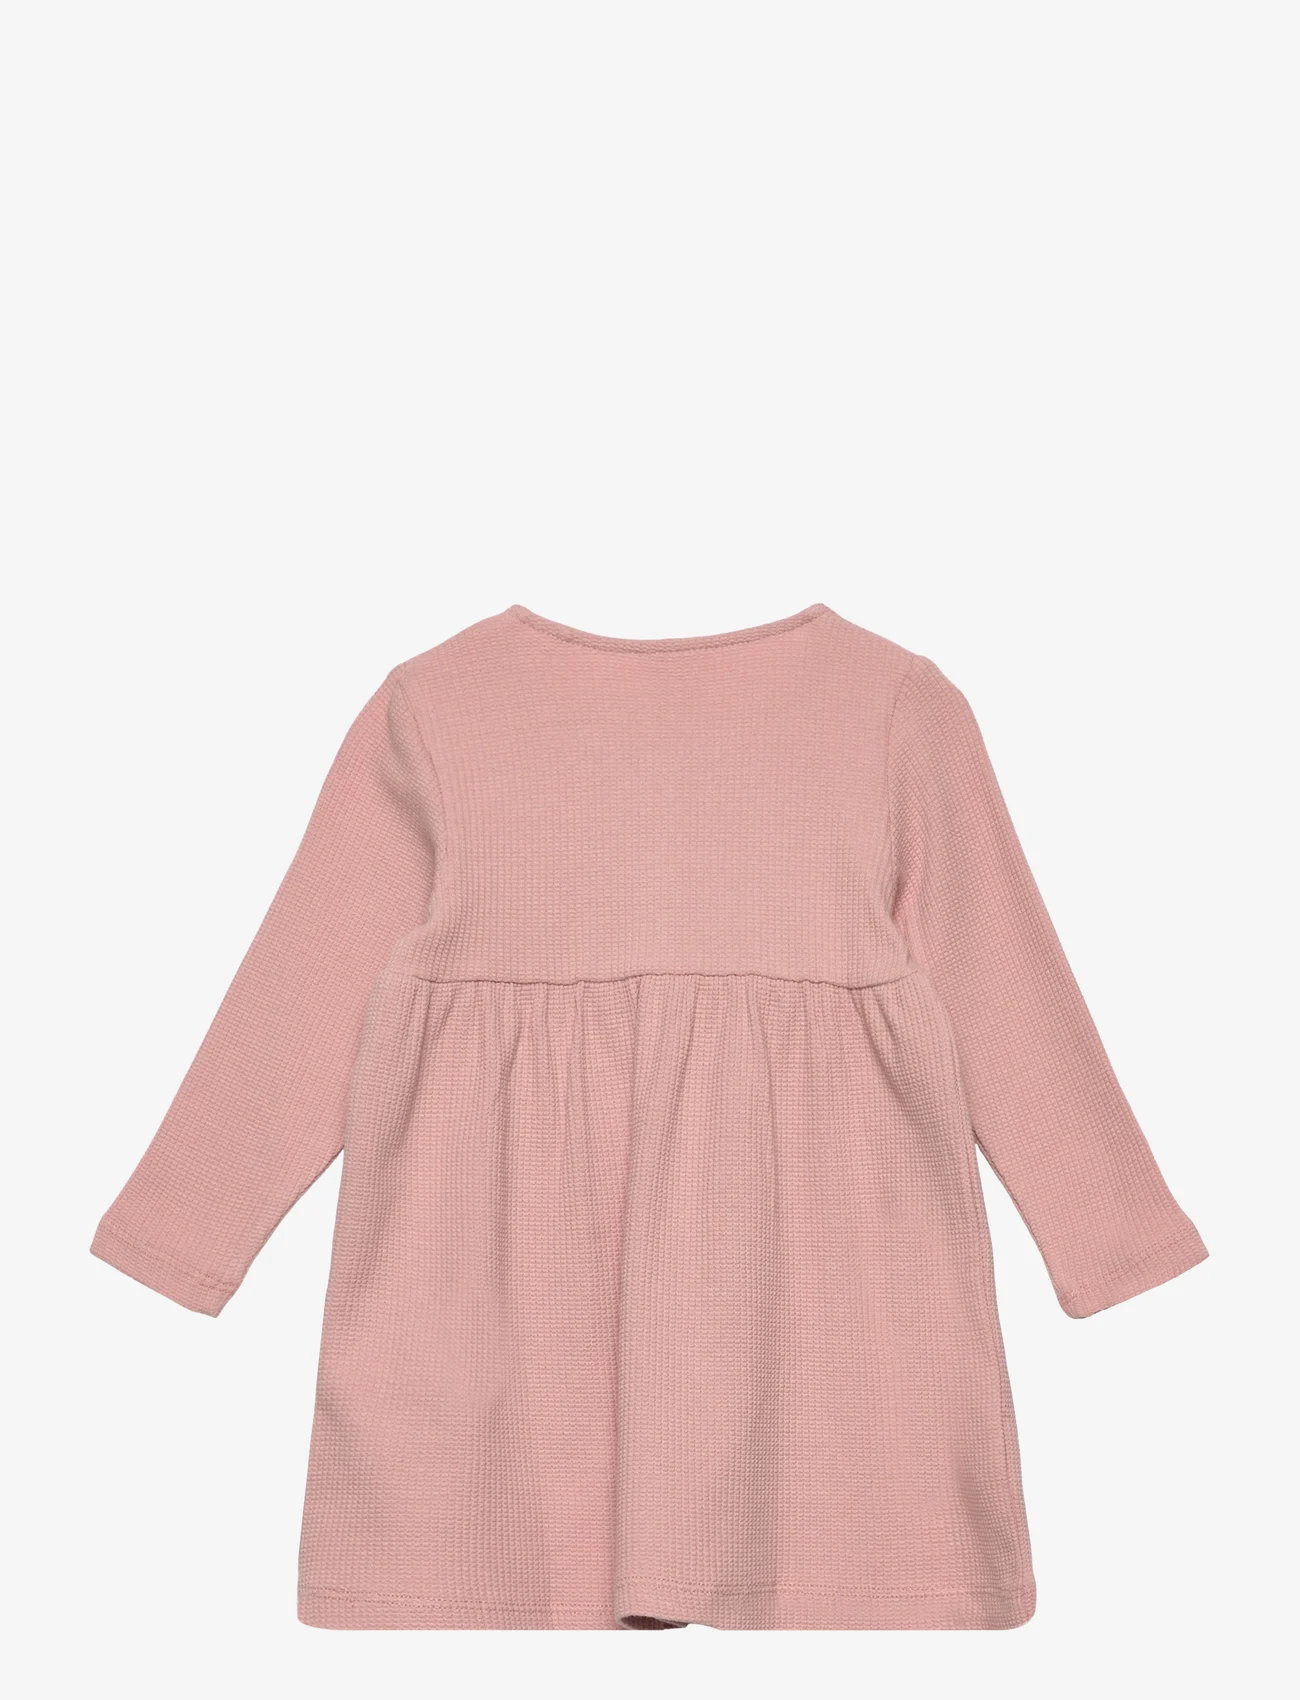 Lindex - Dress solid waffle - jupes - dusty pink - 1